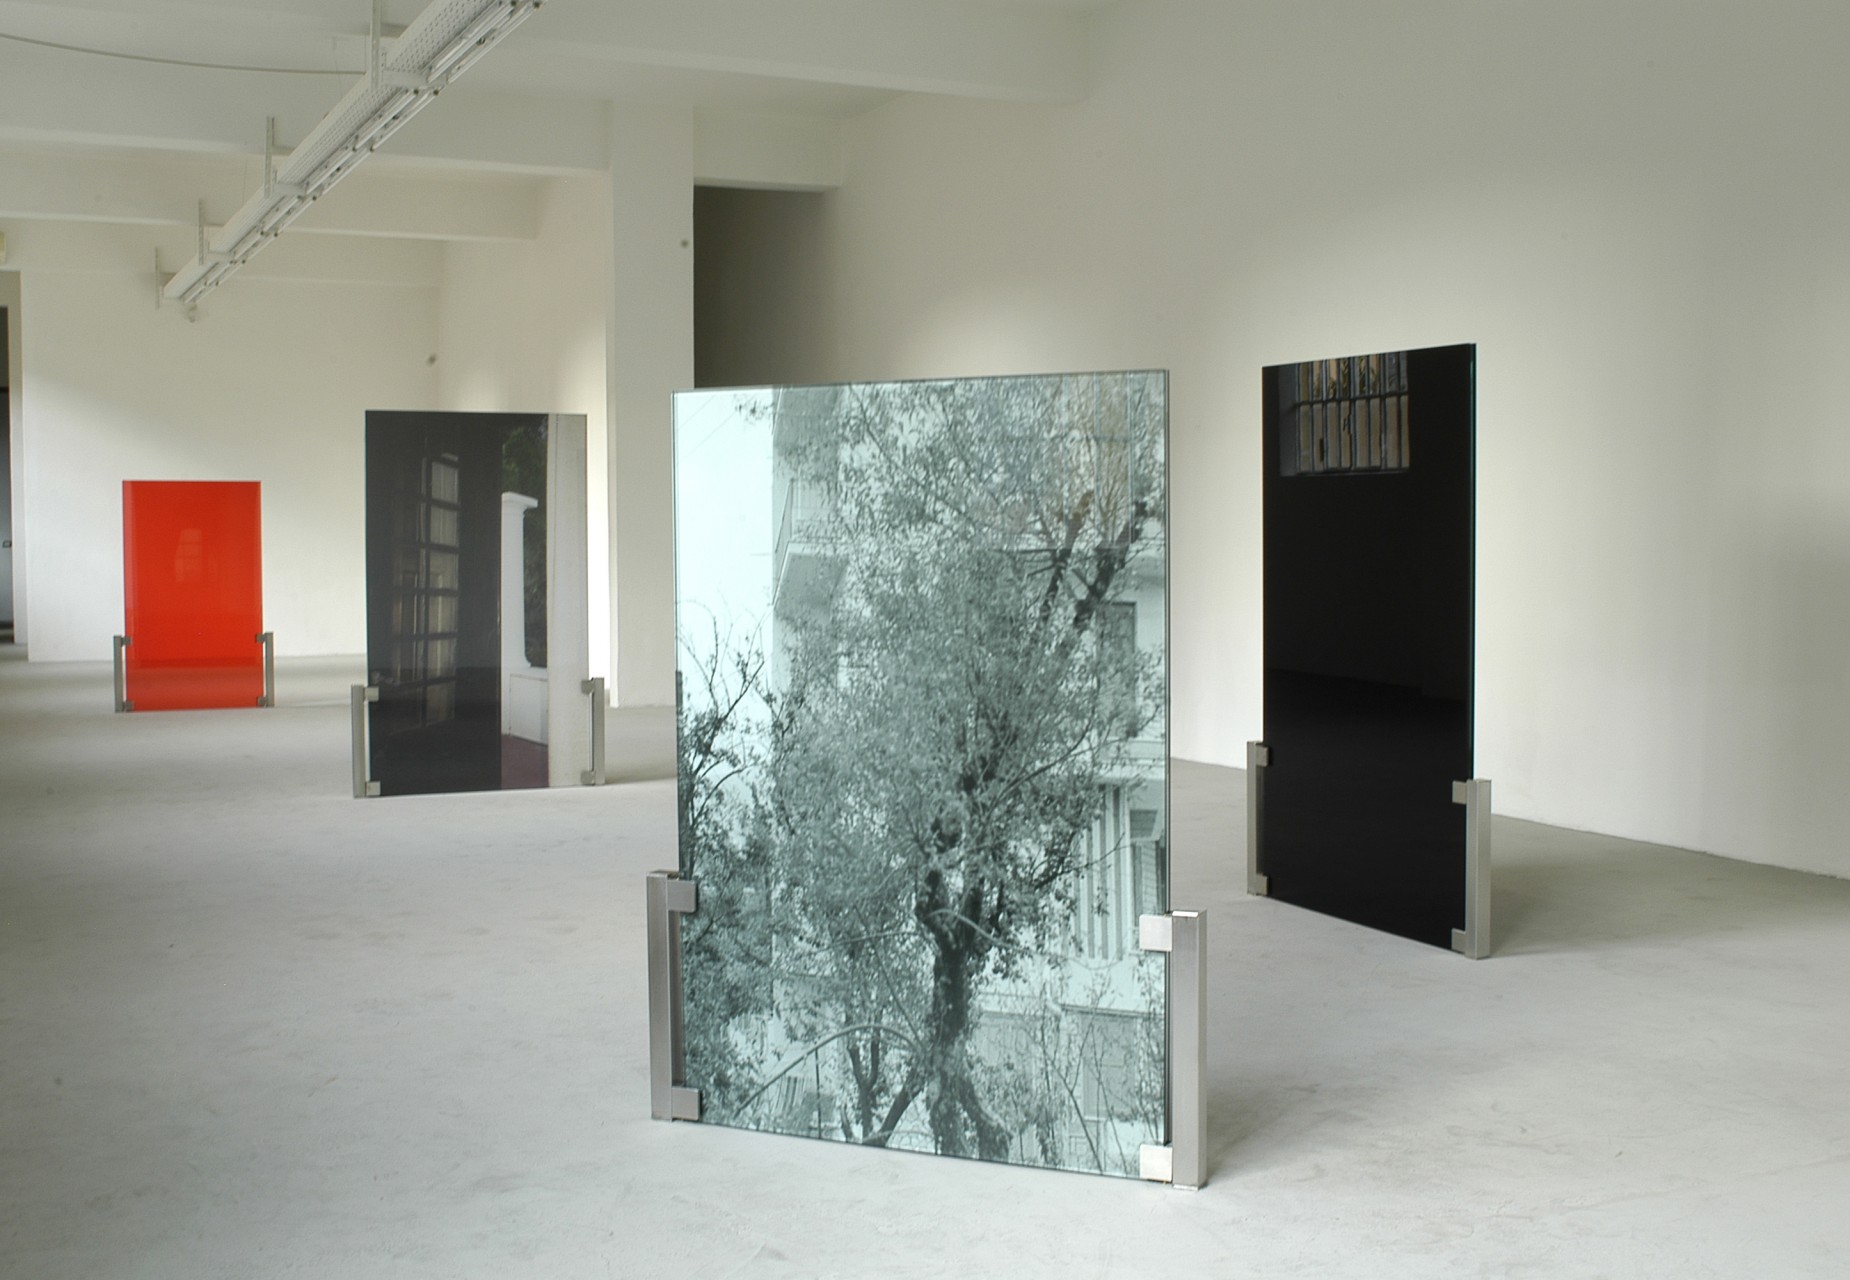 Yuki Kimura, <i>An Extra Transparent History</i>, 2013, installation view of the exhibition at Gluck50, Milan. Courtesy of the artist and Gluck50. Ph. Raph Meazza